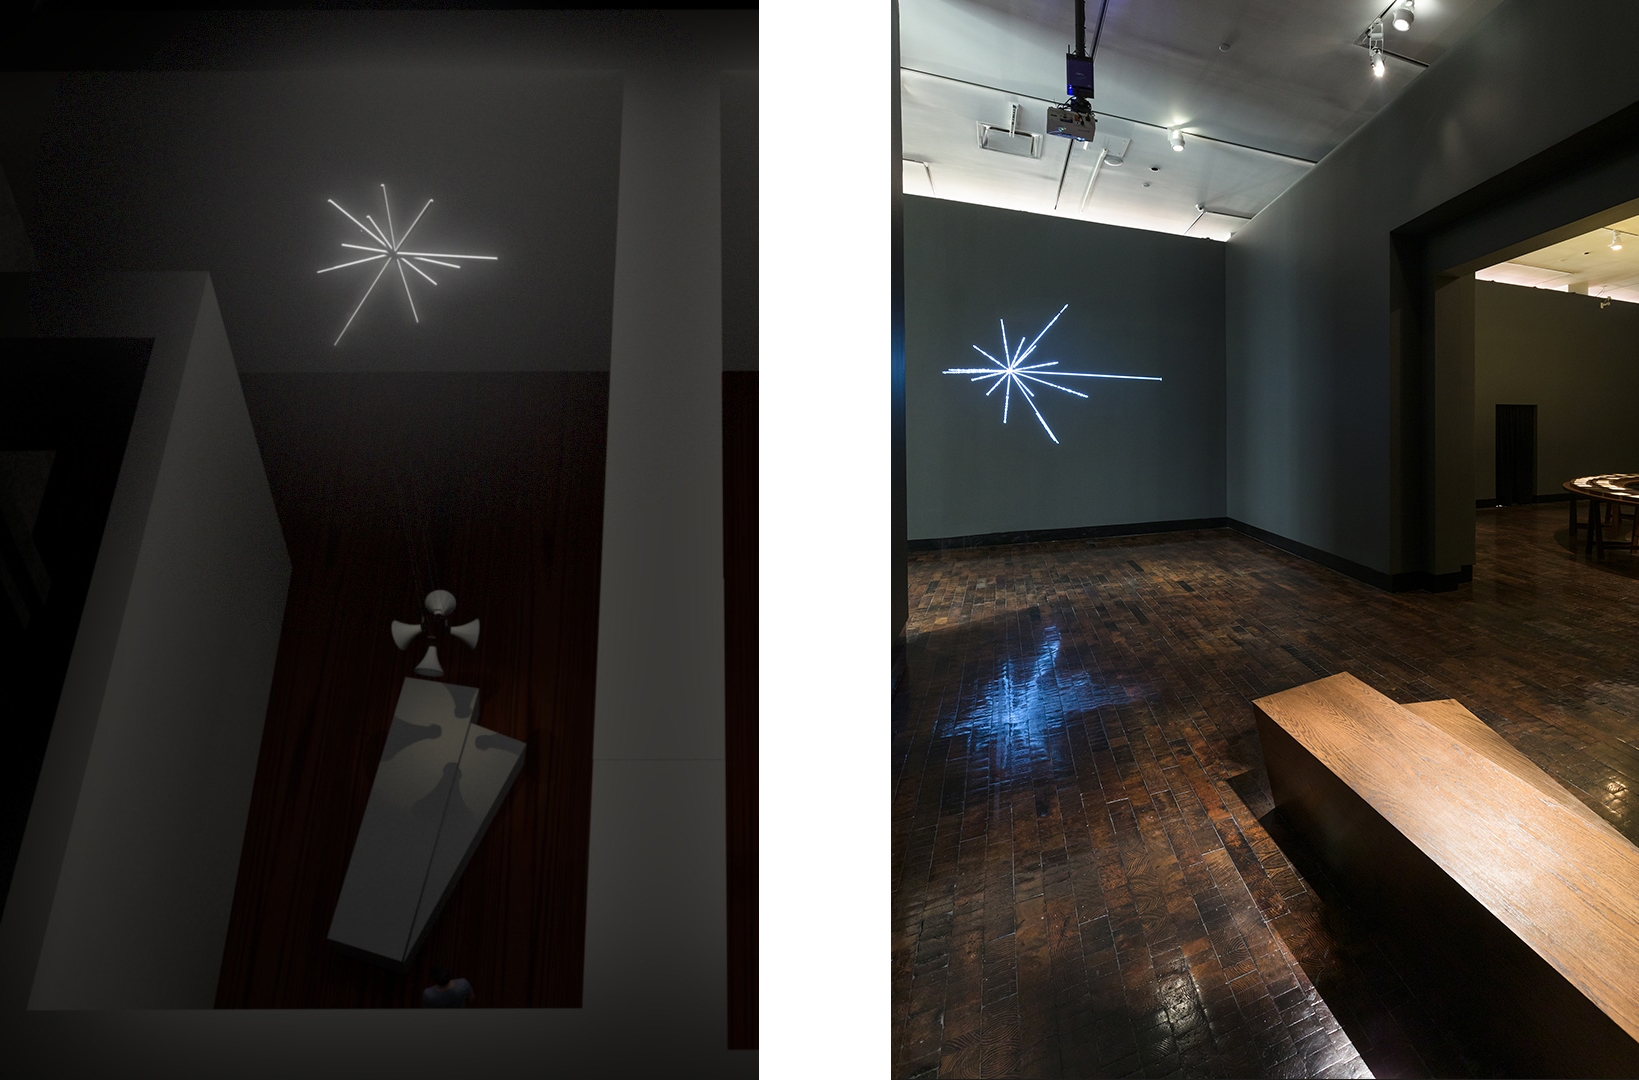 Two images. On the left is a 3D digital sketch of the bench, speaker, and light sculpture. On the right is an installation photo of the same three components.